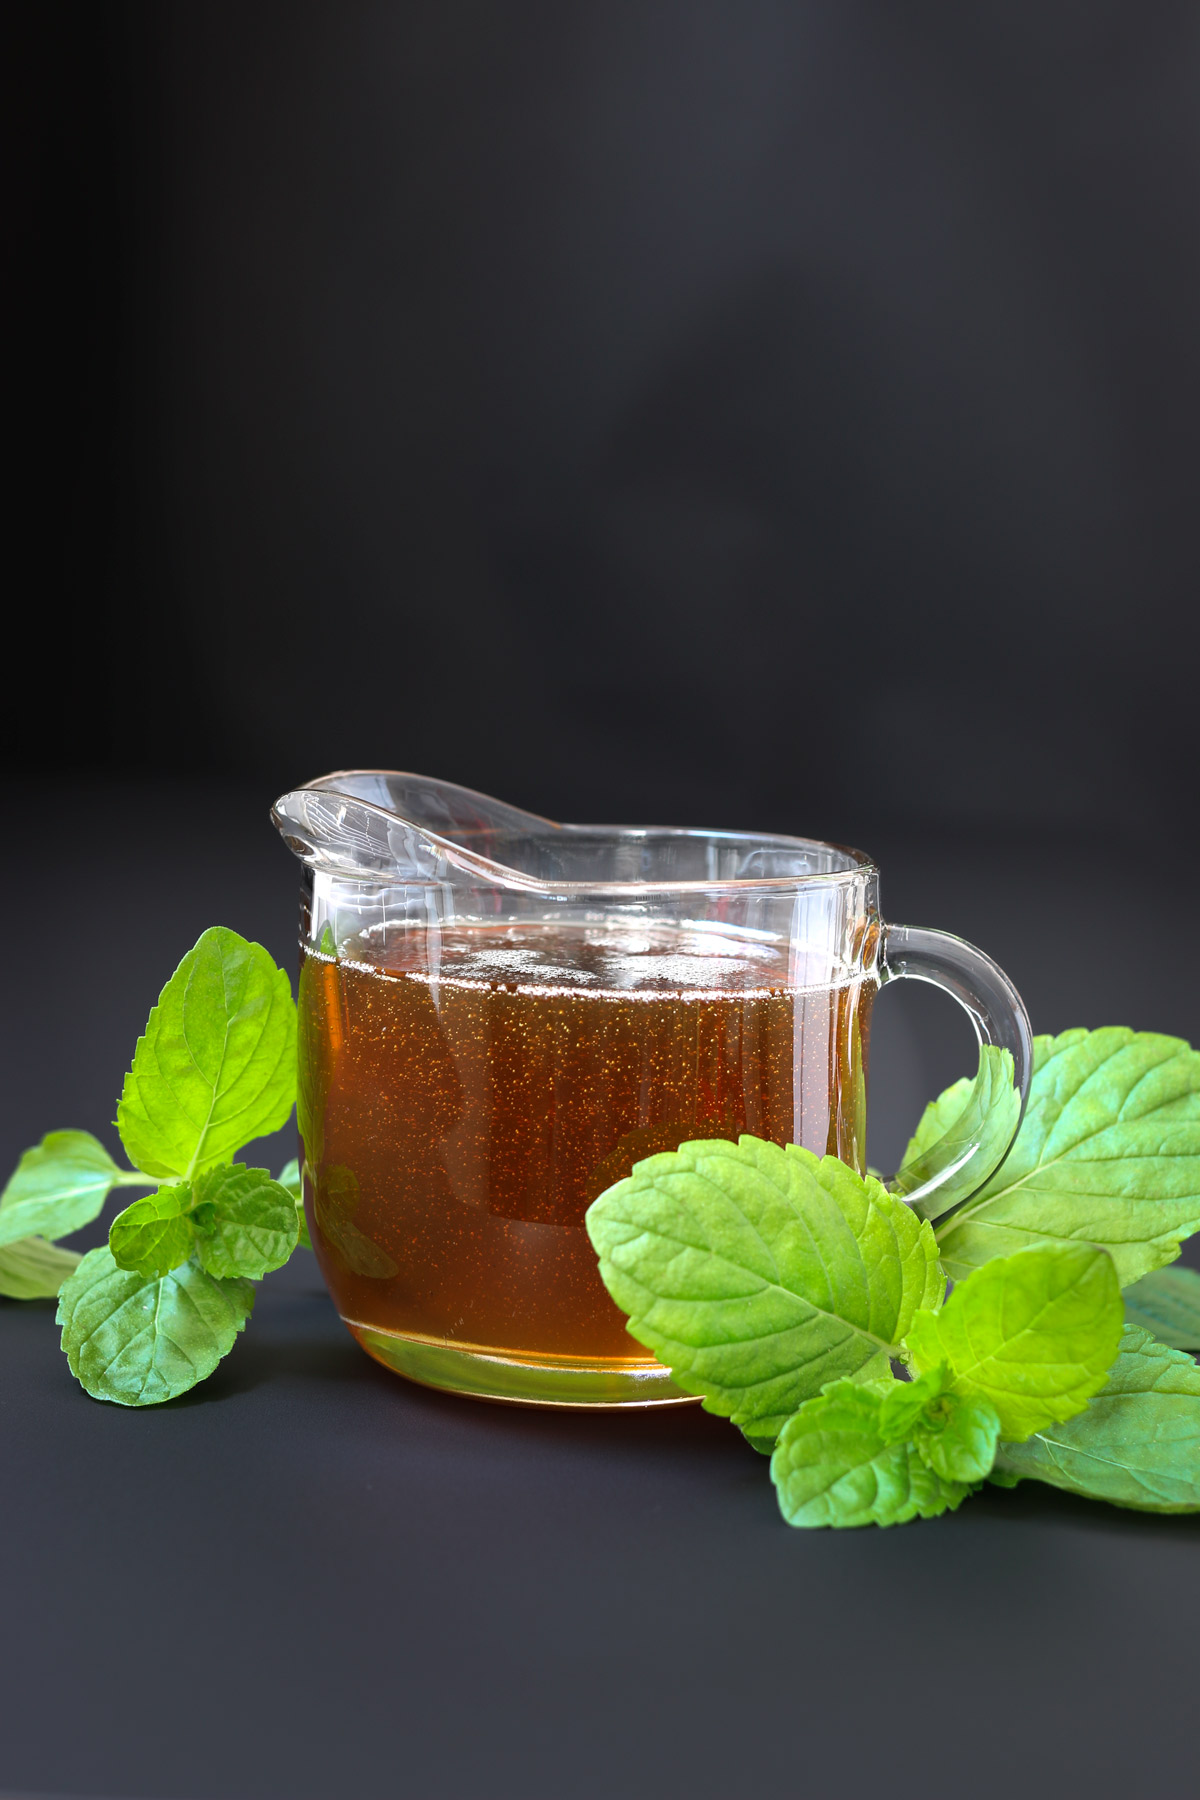 sideview of peppermint syrup in glass pitcher with sprigs of fresh mint nearby on black table.